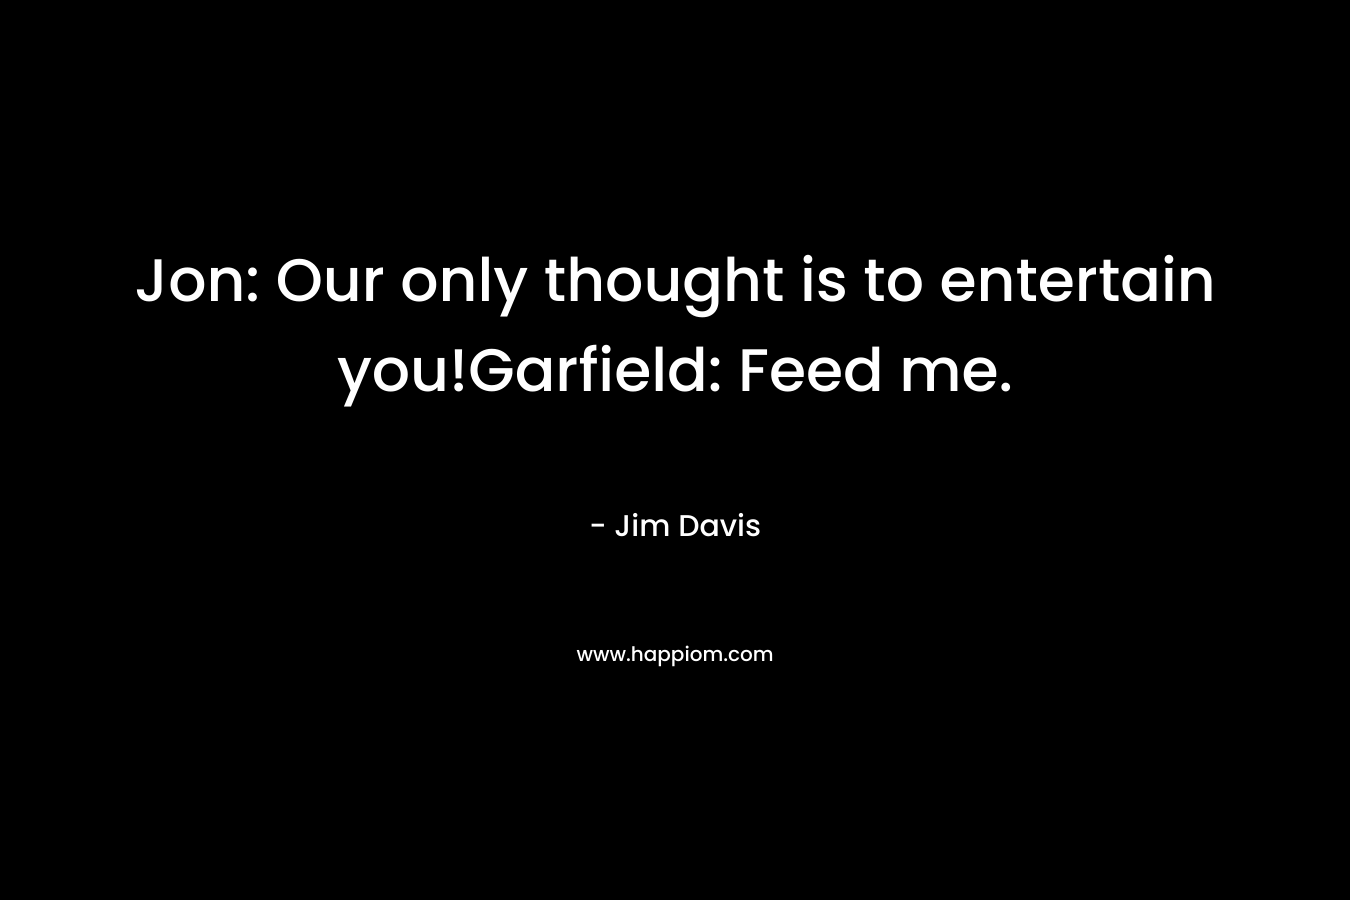 Jon: Our only thought is to entertain you!Garfield: Feed me.